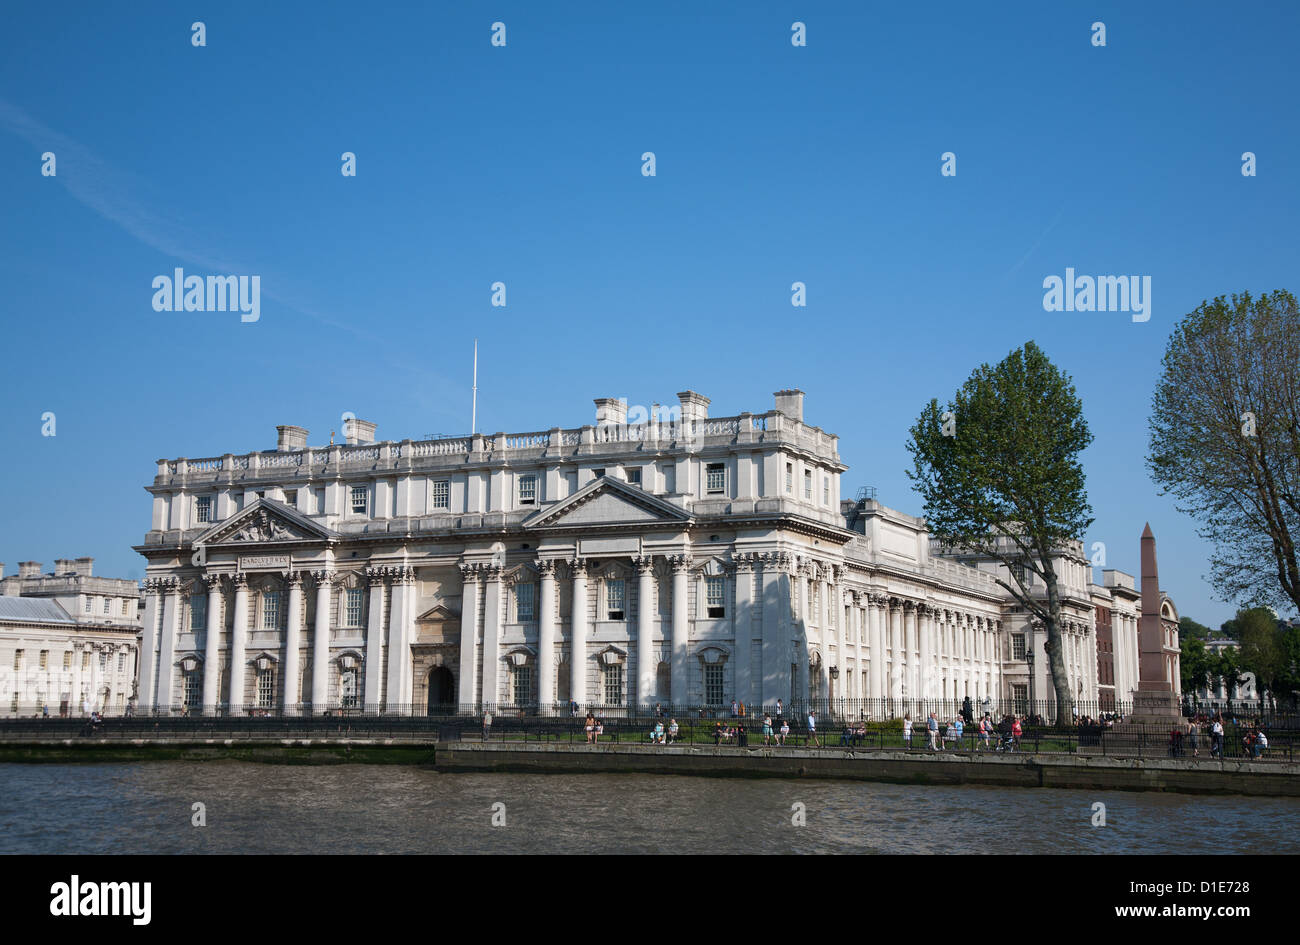 The Royal Naval College on the River Thames, UNESCO World Heritage Site, Greenwich, London, England, United Kingdom, Europe Stock Photo